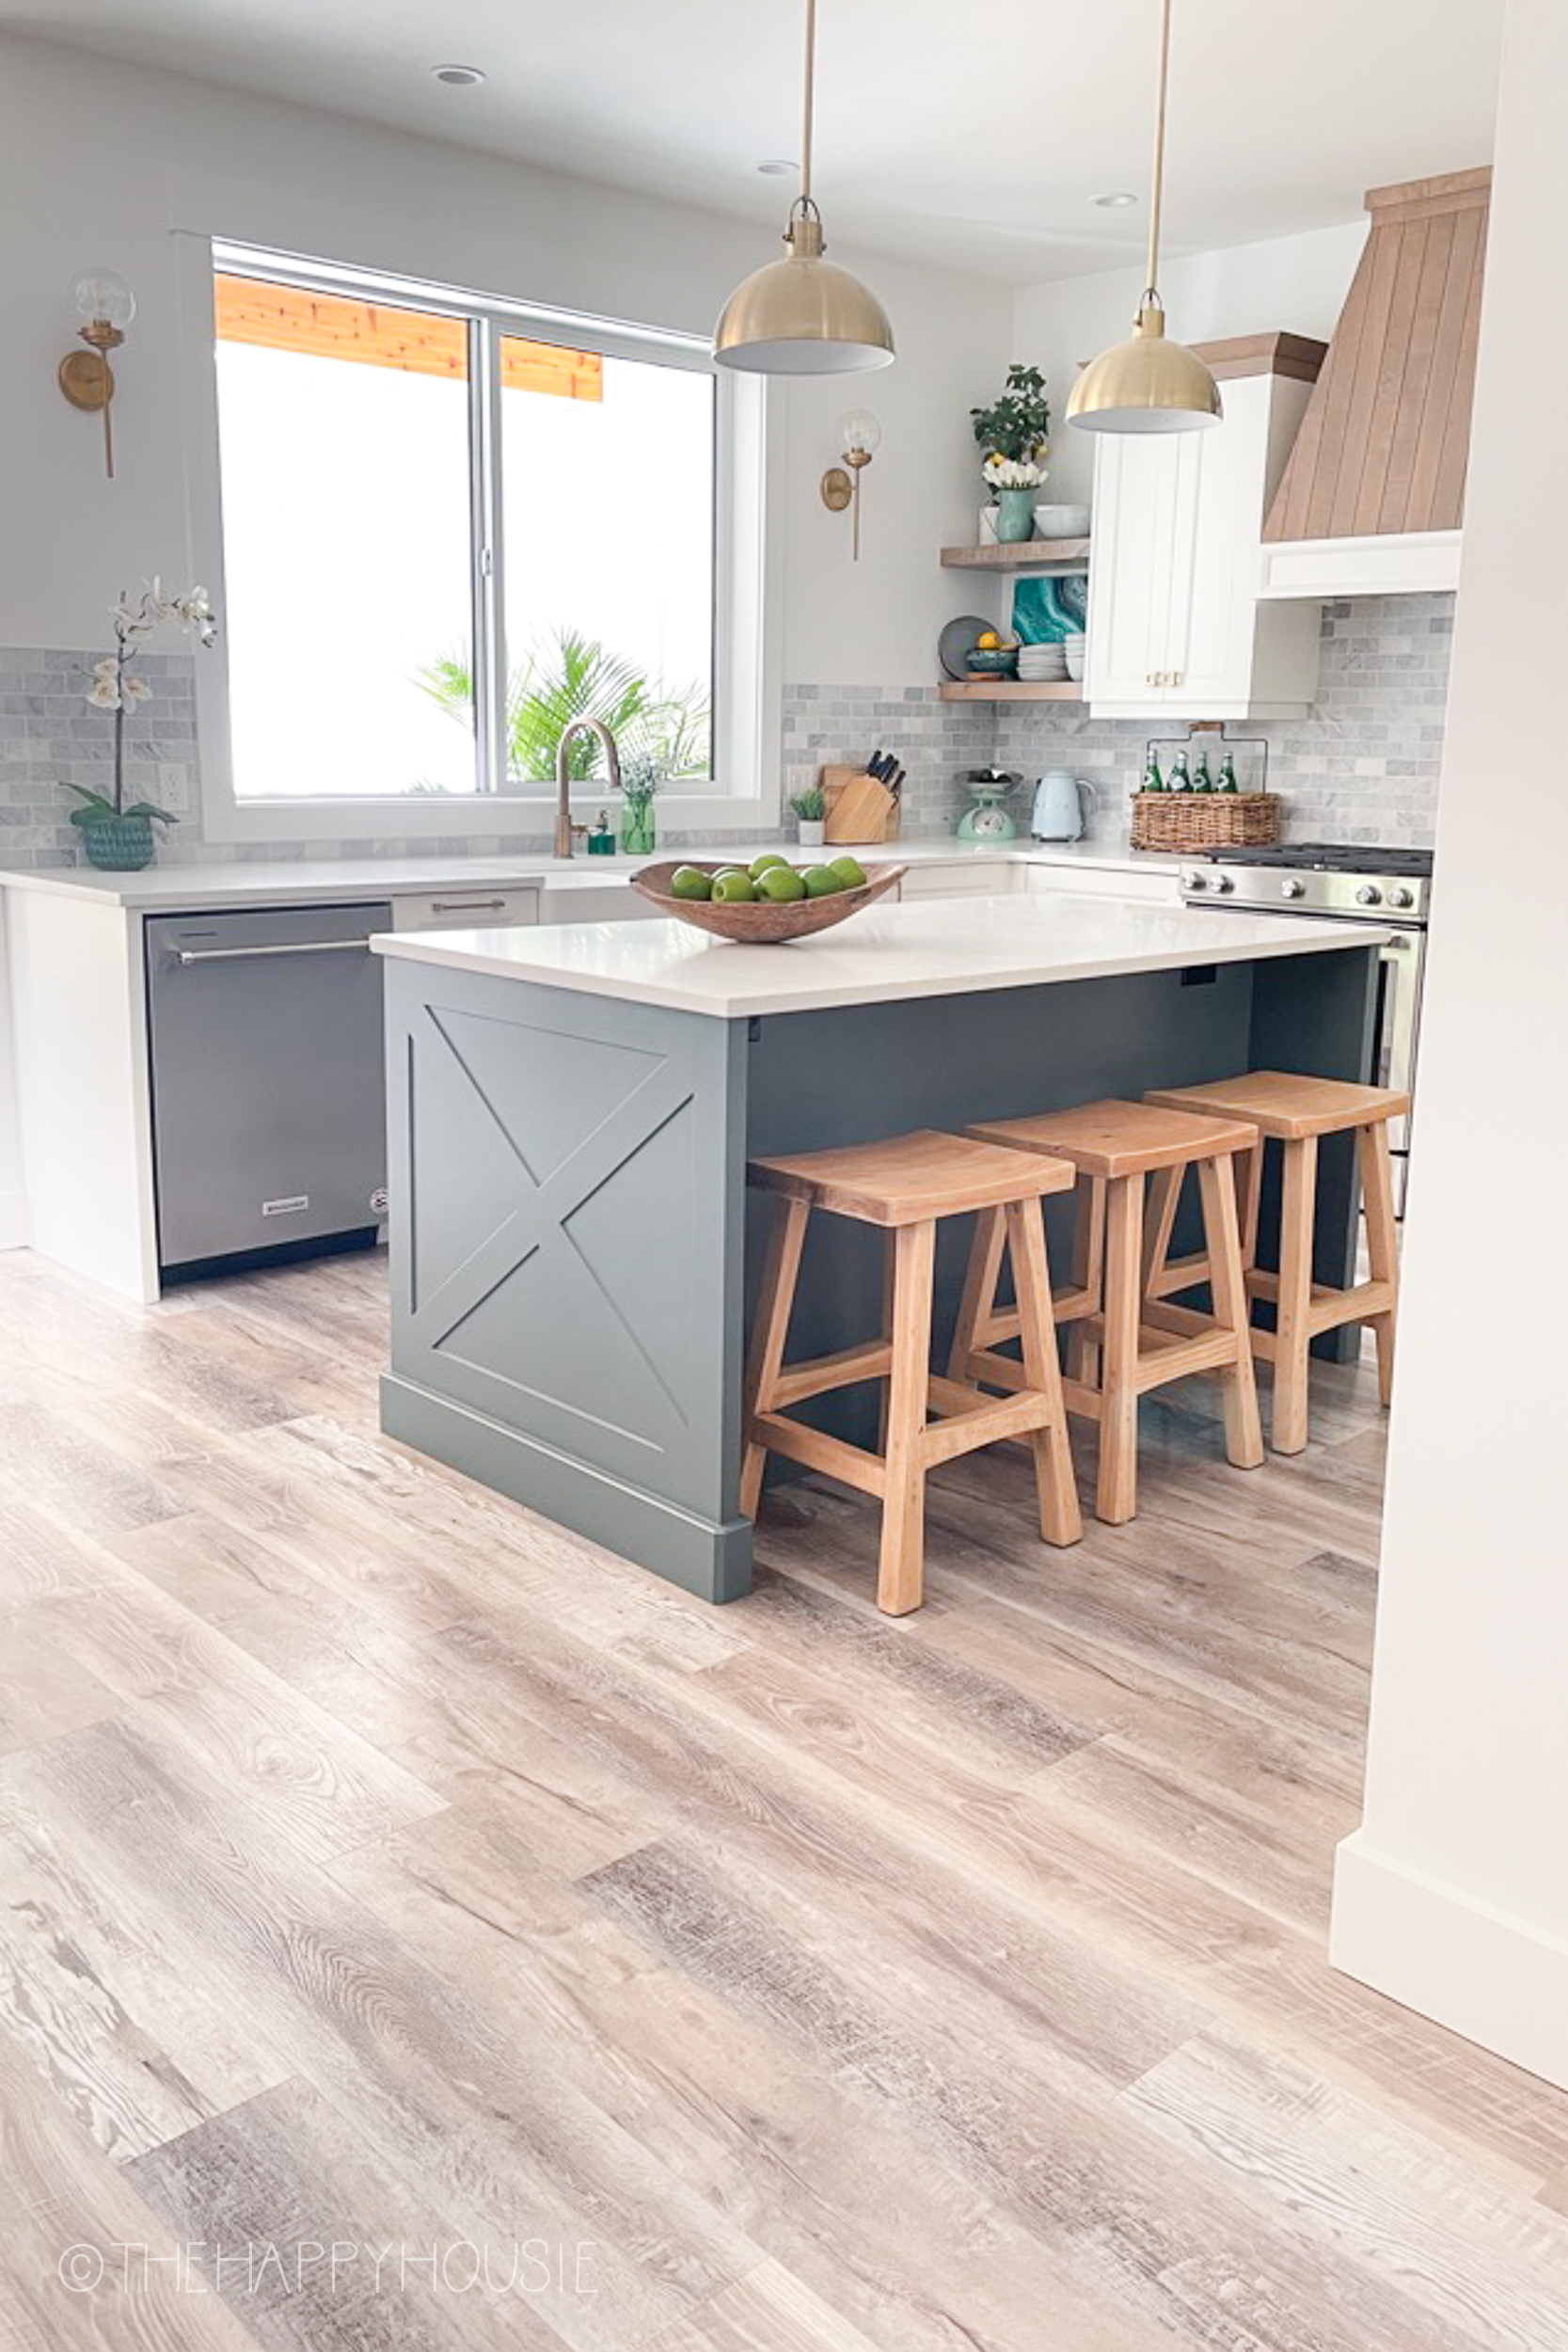 Why We Chose Vinyl Plank Flooring for Our New Build Home   The ...